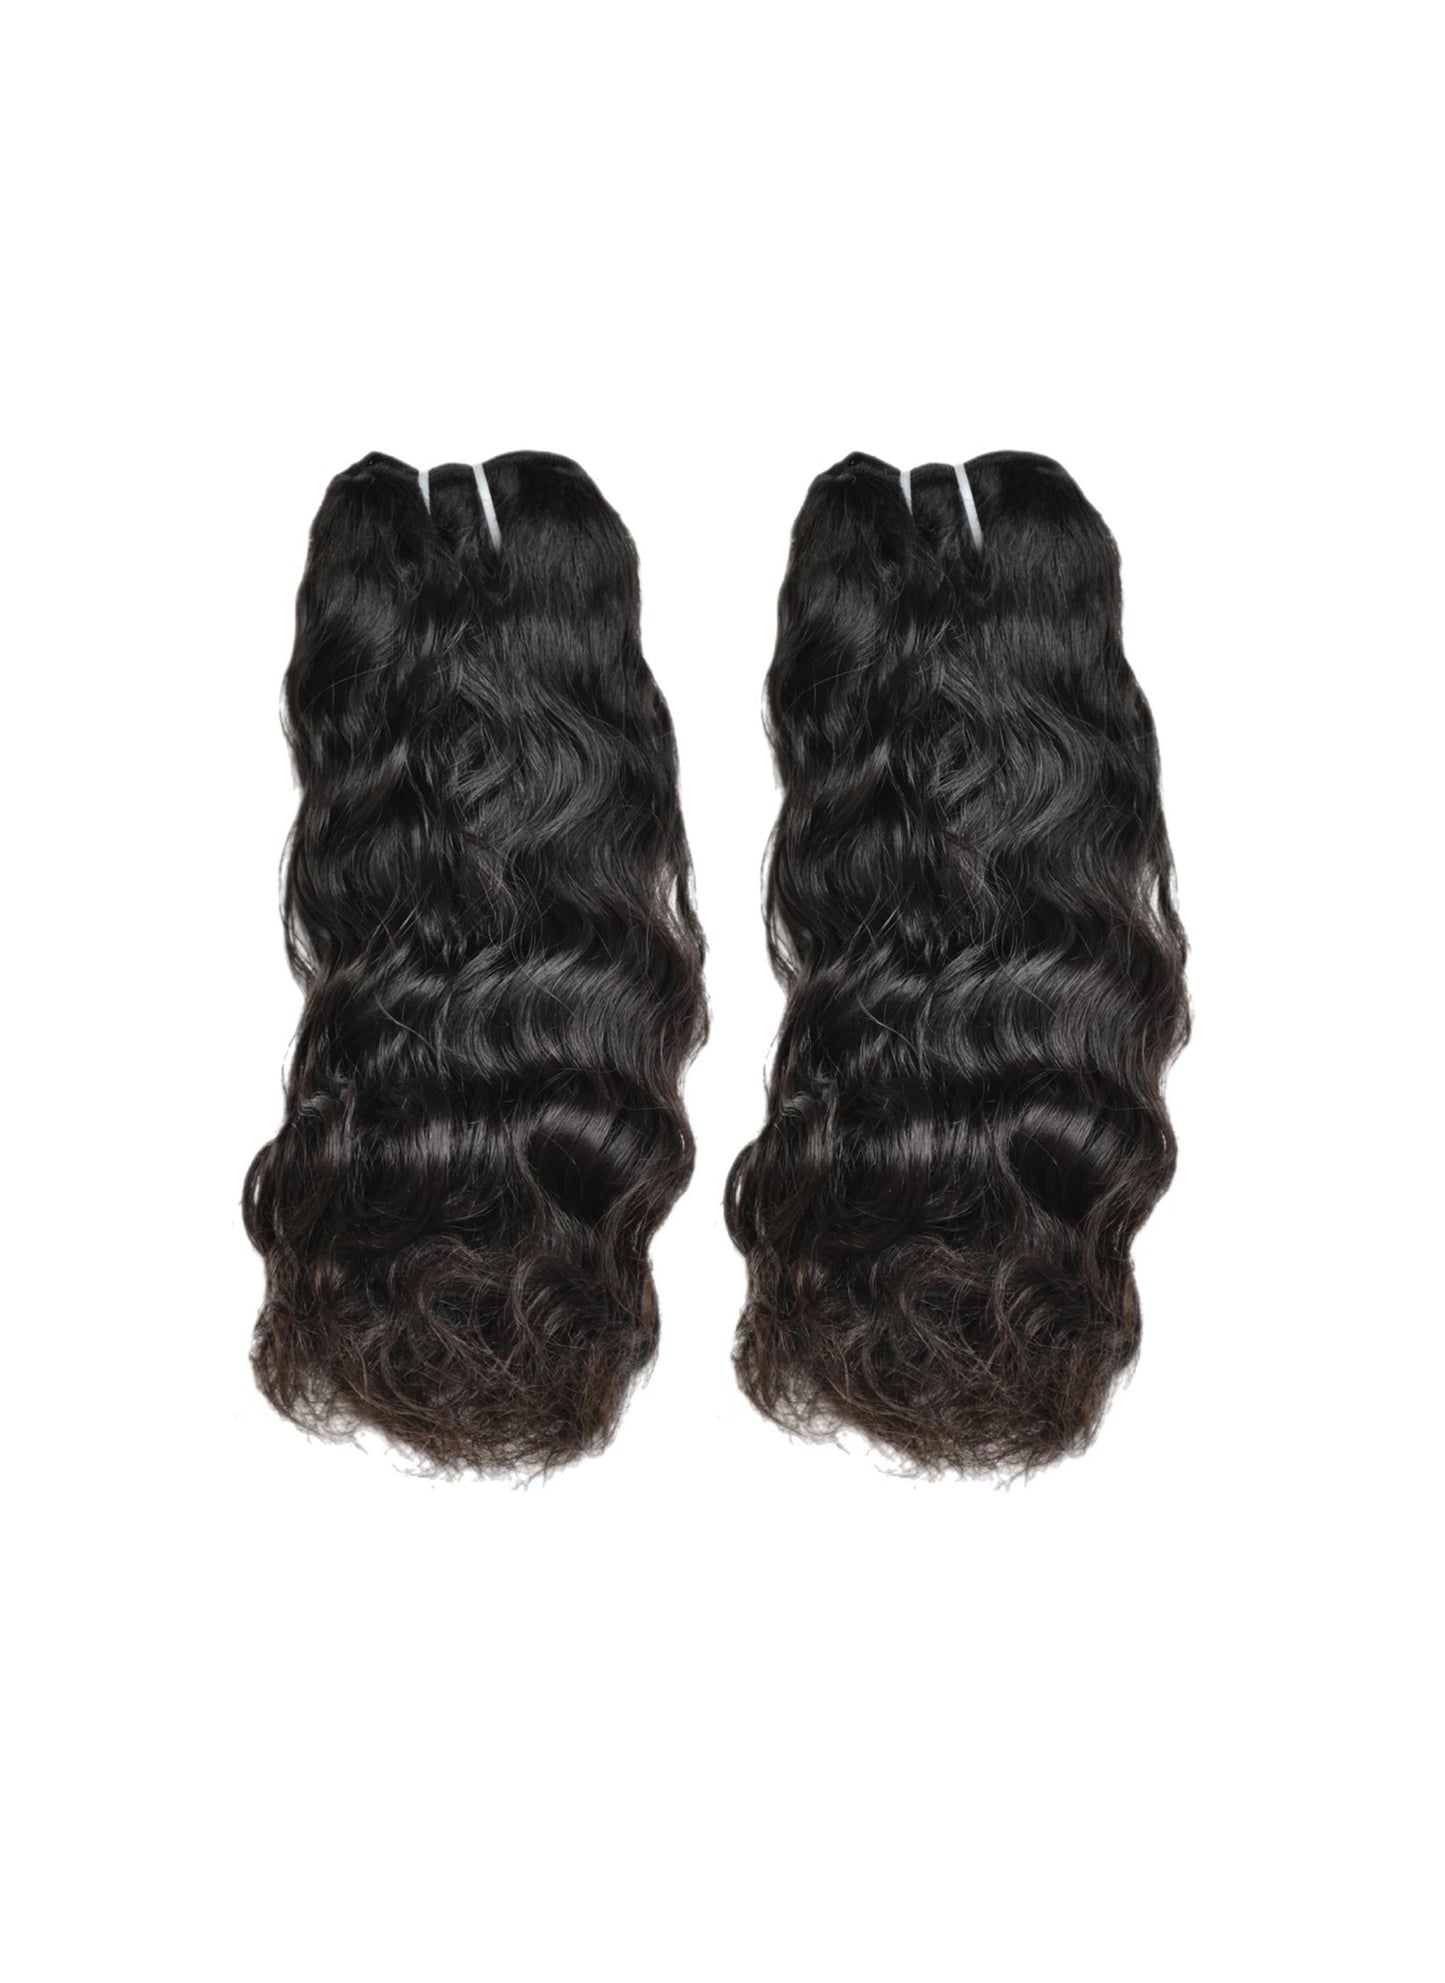 Luxury Raw Indian Temple Extensions Bundle